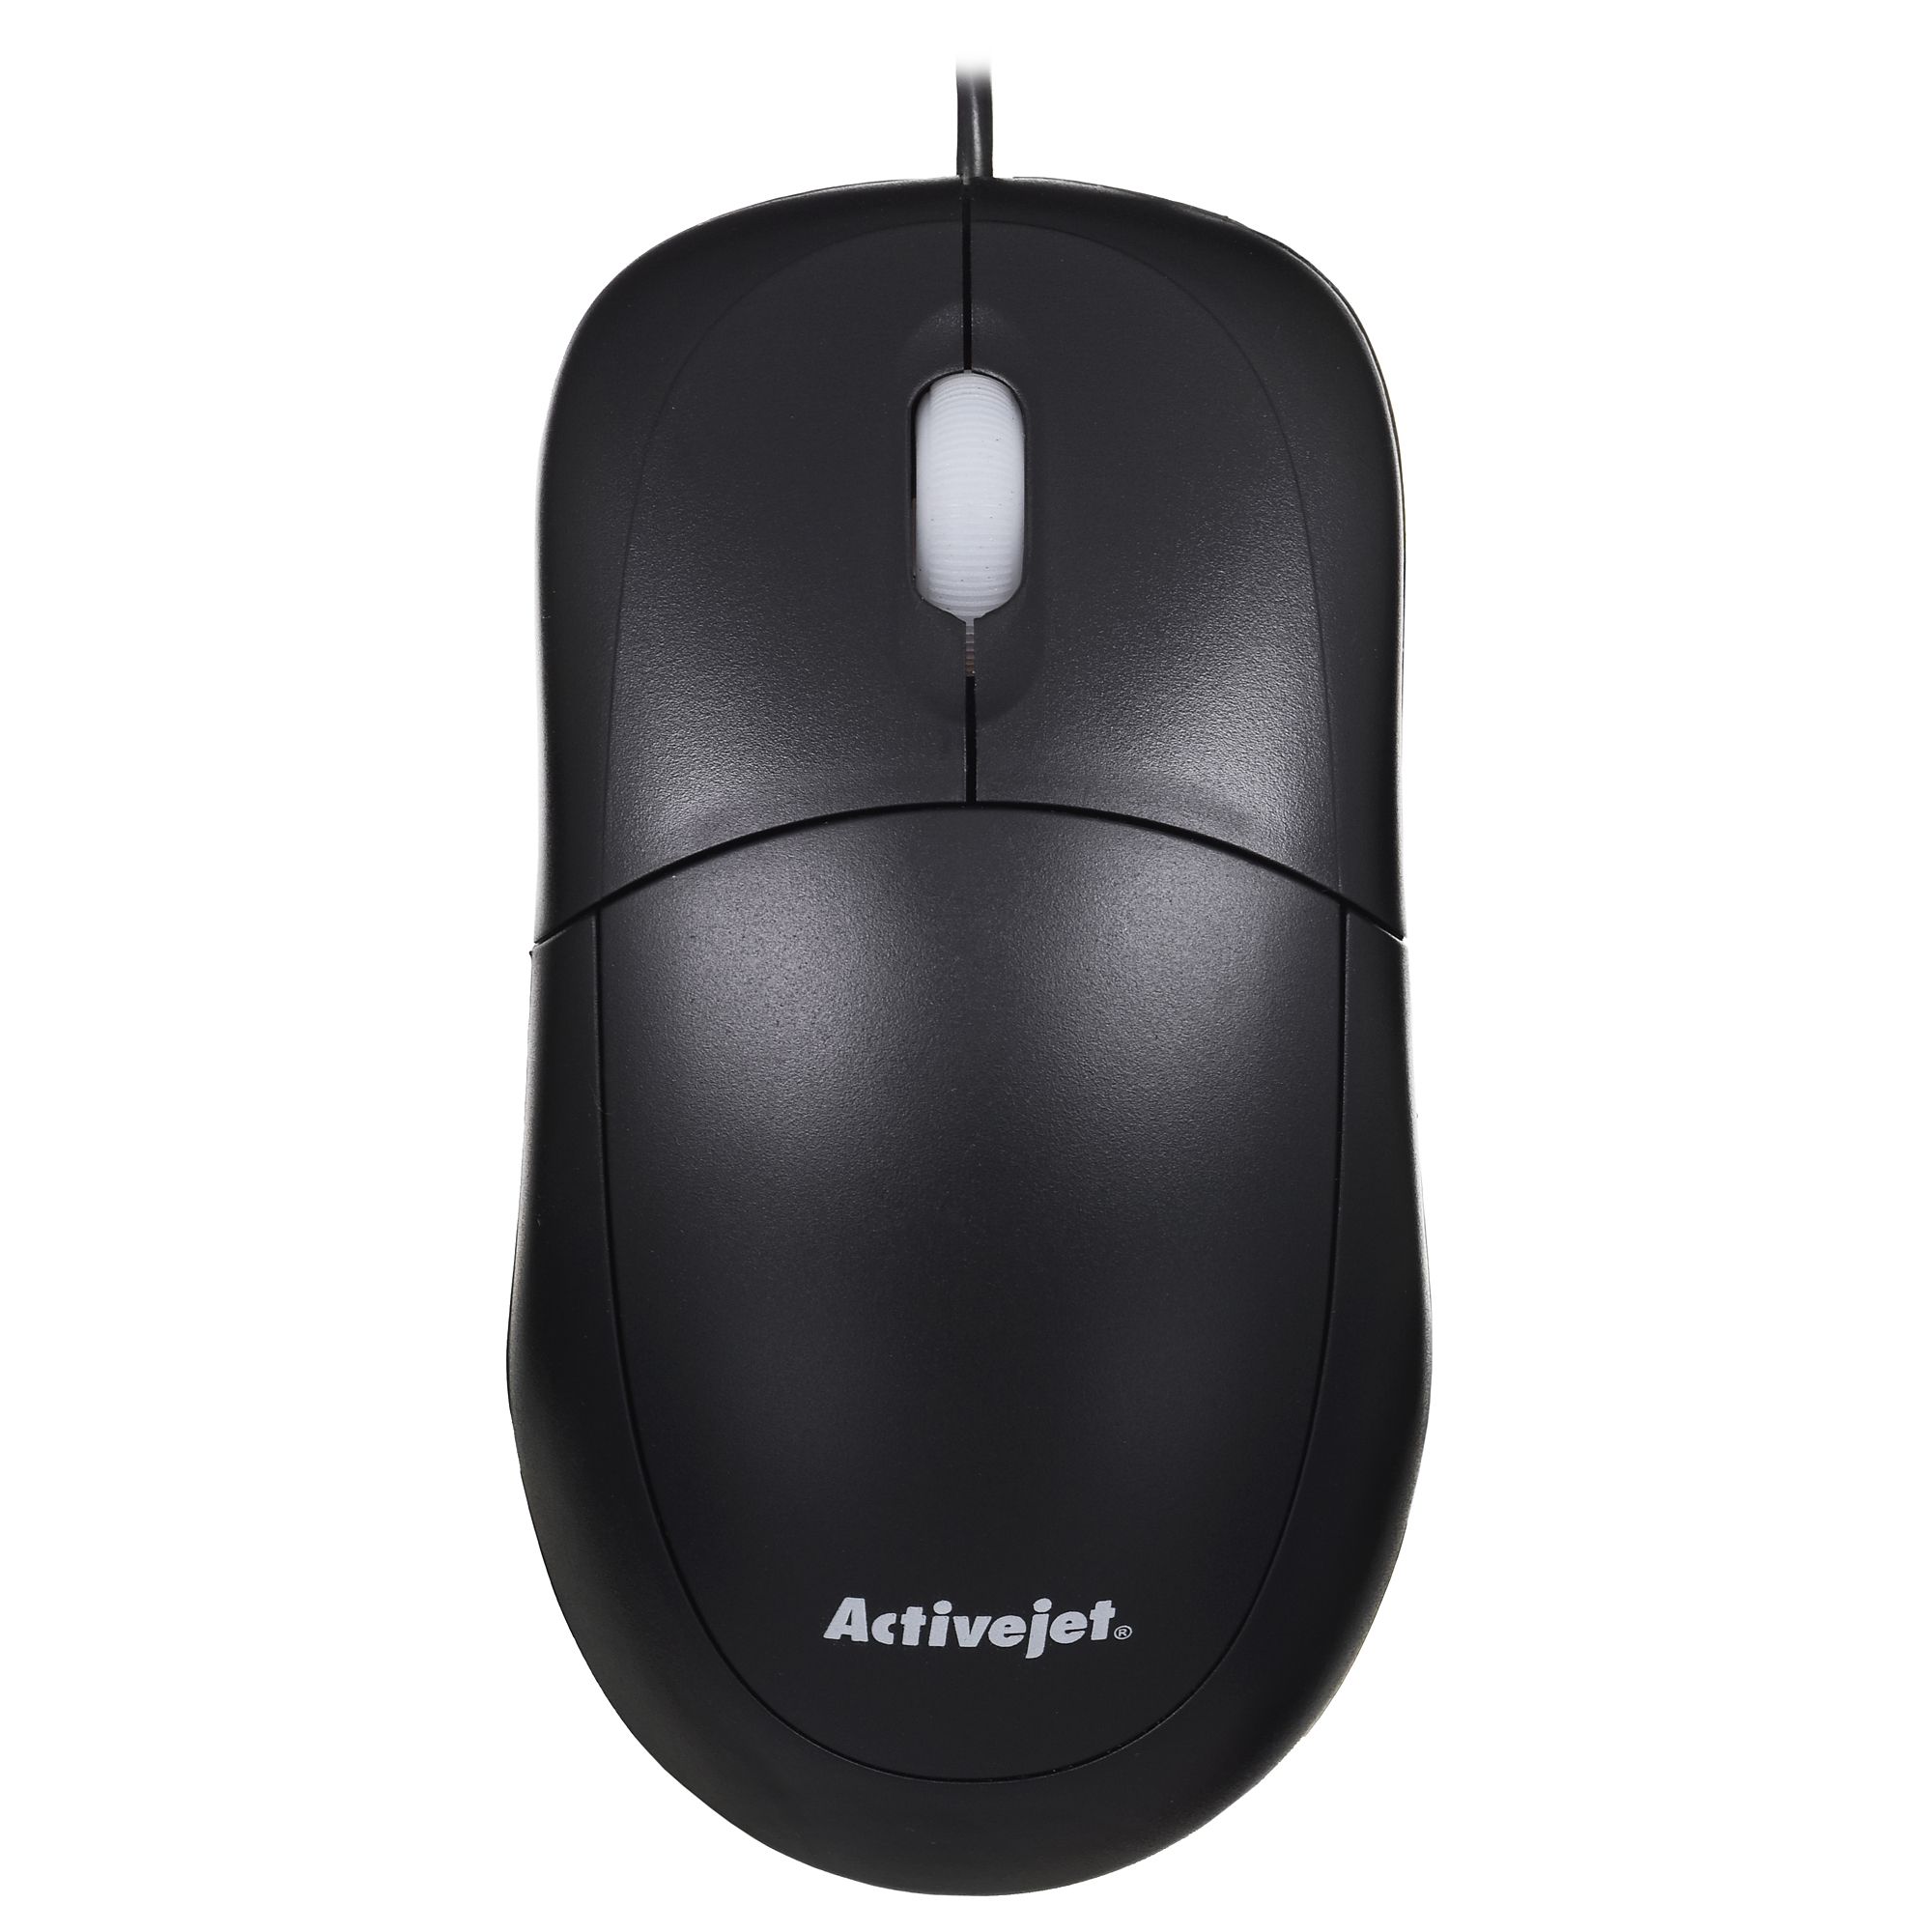 Activejet AMY-146 wired optical computer USB mouse